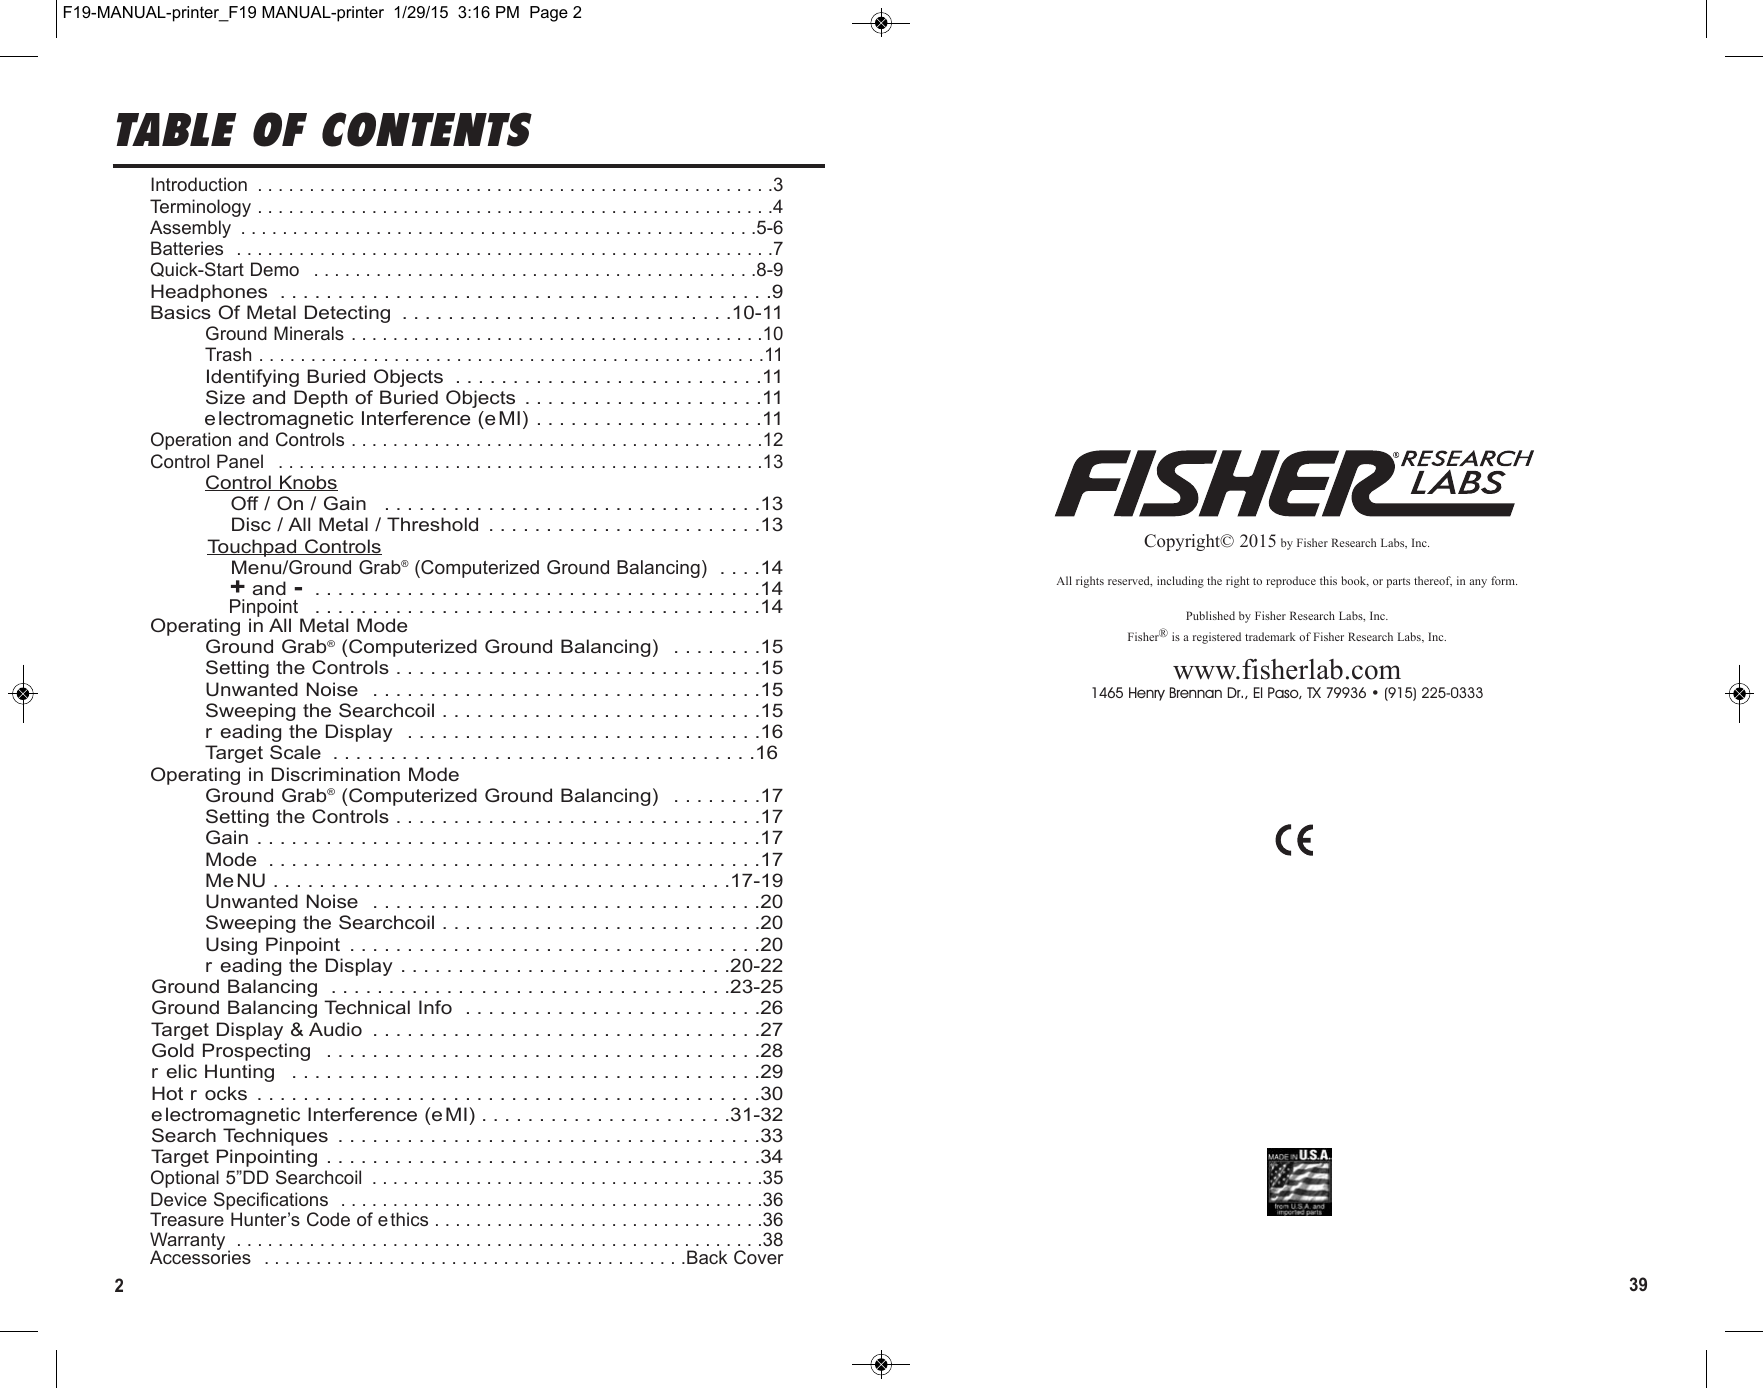 239Copyright© 2015 by Fisher Research Labs, Inc.All rights reserved, including the right to reproduce this book, or parts thereof, in any form.Published by Fisher Research Labs, Inc.Fisher®is a registered trademark of Fisher Research Labs, Inc.www.fisherlab.com1465 Henry Brennan Dr., El Paso, TX 79936 • (915) 225-0333TABLE OF CONTENTSIntroduction  . . . . . . . . . . . . . . . . . . . . . . . . . . . . . . . . . . . . . . . . . . . . . . . . . .3Terminology . . . . . . . . . . . . . . . . . . . . . . . . . . . . . . . . . . . . . . . . . . . . . . . . . .4Assembly  . . . . . . . . . . . . . . . . . . . . . . . . . . . . . . . . . . . . . . . . . . . . . . . . . .5-6Batteries  . . . . . . . . . . . . . . . . . . . . . . . . . . . . . . . . . . . . . . . . . . . . . . . . . . . .7Quick-Start Demo  . . . . . . . . . . . . . . . . . . . . . . . . . . . . . . . . . . . . . . . . . . .8-9Headphones  . . . . . . . . . . . . . . . . . . . . . . . . . . . . . . . . . . . . . . . . . . .9Basics Of Metal Detecting  . . . . . . . . . . . . . . . . . . . . . . . . . . . . .10-11Ground Minerals . . . . . . . . . . . . . . . . . . . . . . . . . . . . . . . . . . . . . . . .10Trash . . . . . . . . . . . . . . . . . . . . . . . . . . . . . . . . . . . . . . . . . . . . . . . . .11Identifying Buried Objects  . . . . . . . . . . . . . . . . . . . . . . . . . . .11Size and Depth of Buried Objects . . . . . . . . . . . . . . . . . . . . .11electromagnetic Interference (e MI) . . . . . . . . . . . . . . . . . . . .11Operation and Controls . . . . . . . . . . . . . . . . . . . . . . . . . . . . . . . . . . . . . . . .12Control Panel  . . . . . . . . . . . . . . . . . . . . . . . . . . . . . . . . . . . . . . . . . . . . . . .13Control KnobsOff / On / Gain  . . . . . . . . . . . . . . . . . . . . . . . . . . . . . . . . .13Disc / All Metal / Threshold  . . . . . . . . . . . . . . . . . . . . . . . .13Touchpad ControlsMenu/Ground Grab®(Computerized Ground Balancing) . . . .14+and - . . . . . . . . . . . . . . . . . . . . . . . . . . . . . . . . . . . . . . .14Pinpoint . . . . . . . . . . . . . . . . . . . . . . . . . . . . . . . . . . . . . . .14Operating in All Metal ModeGround Grab®(Computerized Ground Balancing)  . . . . . . . .15Setting the Controls . . . . . . . . . . . . . . . . . . . . . . . . . . . . . . . .15Unwanted Noise  . . . . . . . . . . . . . . . . . . . . . . . . . . . . . . . . . .15Sweeping the Searchcoil . . . . . . . . . . . . . . . . . . . . . . . . . . . .15r eading the Display  . . . . . . . . . . . . . . . . . . . . . . . . . . . . . . .16Target Scale  . . . . . . . . . . . . . . . . . . . . . . . . . . . . . . . . . . . . .16         Operating in Discrimination ModeGround Grab®(Computerized Ground Balancing)  . . . . . . . .17Setting the Controls . . . . . . . . . . . . . . . . . . . . . . . . . . . . . . . .17Gain . . . . . . . . . . . . . . . . . . . . . . . . . . . . . . . . . . . . . . . . . . . .17Mode  . . . . . . . . . . . . . . . . . . . . . . . . . . . . . . . . . . . . . . . . . . .17MeNU . . . . . . . . . . . . . . . . . . . . . . . . . . . . . . . . . . . . . . . .17-19Unwanted Noise  . . . . . . . . . . . . . . . . . . . . . . . . . . . . . . . . . .20Sweeping the Searchcoil . . . . . . . . . . . . . . . . . . . . . . . . . . . .20Using Pinpoint  . . . . . . . . . . . . . . . . . . . . . . . . . . . . . . . . . . . .20r eading the Display . . . . . . . . . . . . . . . . . . . . . . . . . . . . .20-22Ground Balancing  . . . . . . . . . . . . . . . . . . . . . . . . . . . . . . . . . . .23-25Ground Balancing Technical Info  . . . . . . . . . . . . . . . . . . . . . . . . . .26Target Display &amp; Audio  . . . . . . . . . . . . . . . . . . . . . . . . . . . . . . . . . .27Gold Prospecting  . . . . . . . . . . . . . . . . . . . . . . . . . . . . . . . . . . . . . .28r elic Hunting  . . . . . . . . . . . . . . . . . . . . . . . . . . . . . . . . . . . . . . . . .29Hot r ocks  . . . . . . . . . . . . . . . . . . . . . . . . . . . . . . . . . . . . . . . . . . . .30electromagnetic Interference (e MI) . . . . . . . . . . . . . . . . . . . . . .31-32Search Techniques  . . . . . . . . . . . . . . . . . . . . . . . . . . . . . . . . . . . . .33Target Pinpointing . . . . . . . . . . . . . . . . . . . . . . . . . . . . . . . . . . . . . .34Optional 5”DD Searchcoil  . . . . . . . . . . . . . . . . . . . . . . . . . . . . . . . . . . . . . .35Device Specifications  . . . . . . . . . . . . . . . . . . . . . . . . . . . . . . . . . . . . . . . . .36Treasure Hunter’s Code of ethics . . . . . . . . . . . . . . . . . . . . . . . . . . . . . . . .36Warranty  . . . . . . . . . . . . . . . . . . . . . . . . . . . . . . . . . . . . . . . . . . . . . . . . . . .38Accessories  . . . . . . . . . . . . . . . . . . . . . . . . . . . . . . . . . . . . . . . . .Back CoverF19-MANUAL-printer_F19 MANUAL-printer  1/29/15  3:16 PM  Page 2